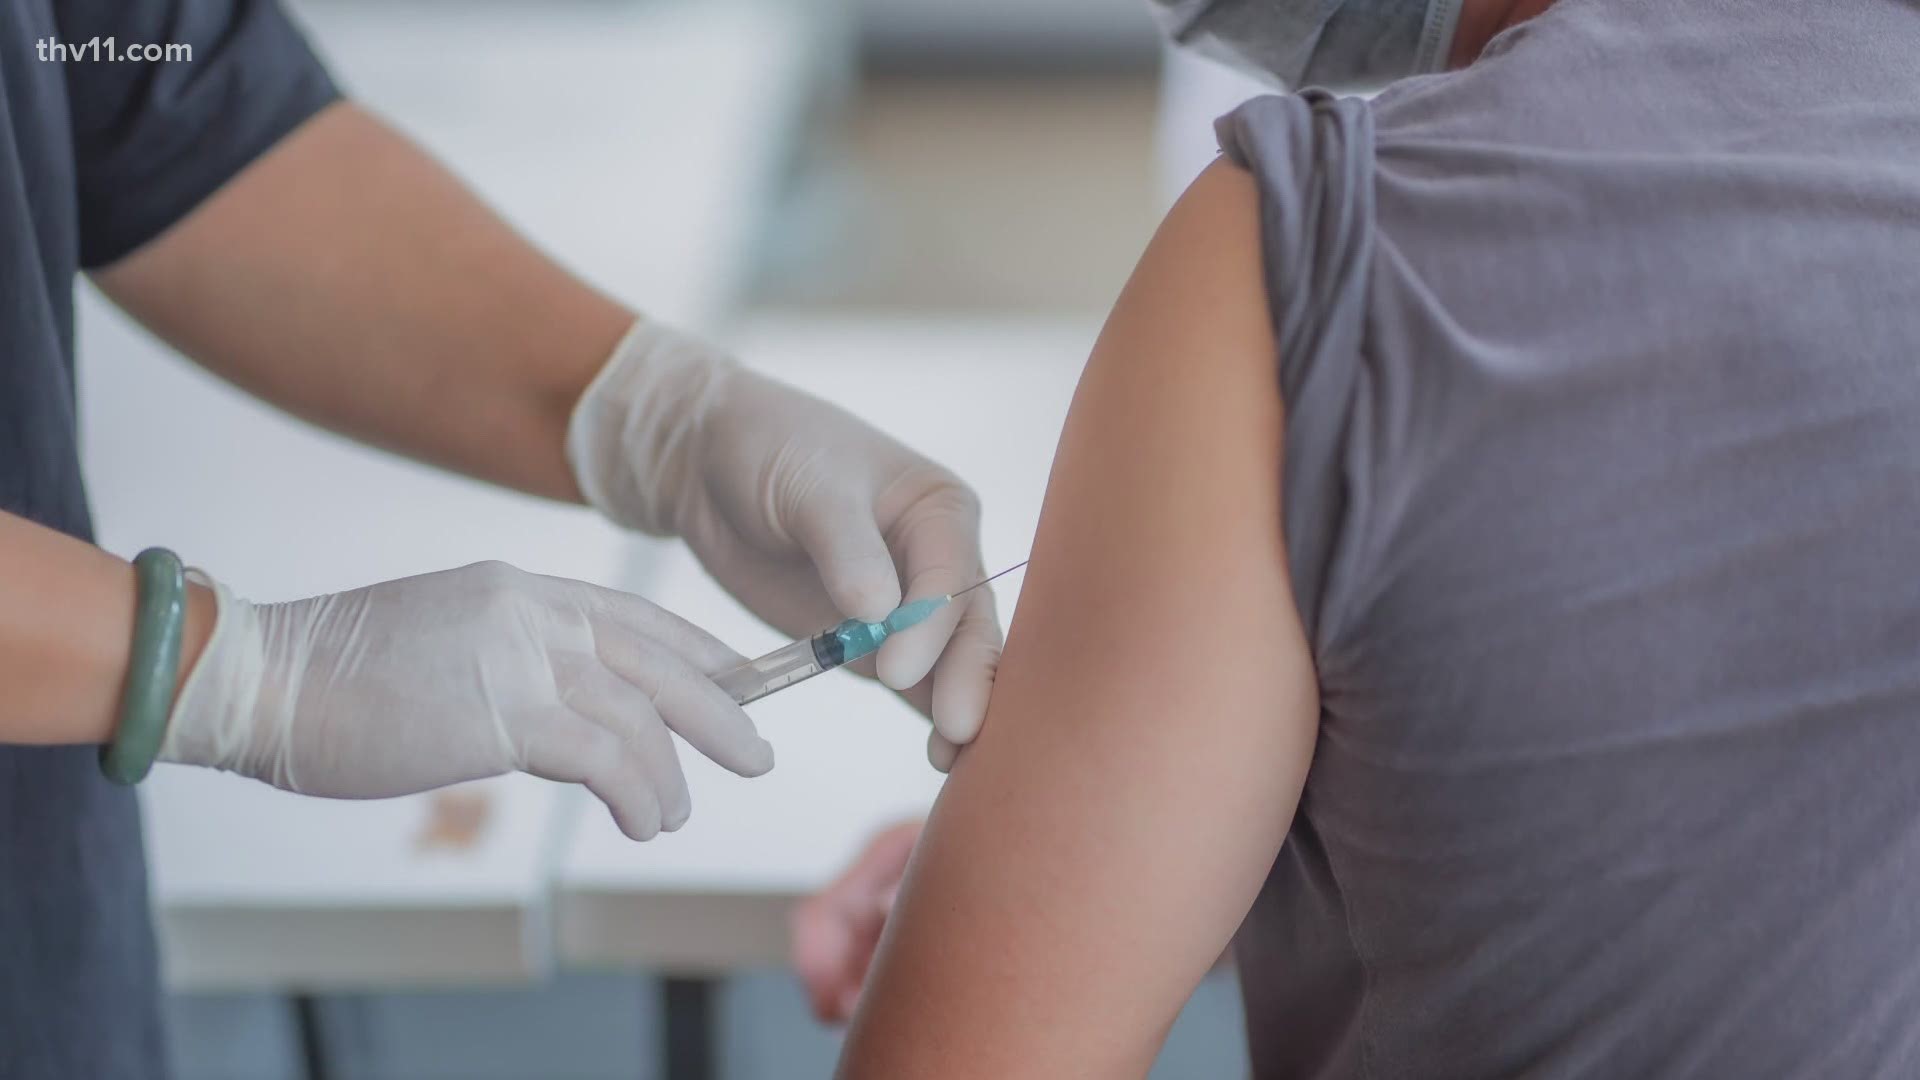 The Centers for Disease Control and Prevention told health officials at the Arkansas Department of Health to start getting ready for a COVID-19 vaccine by November.